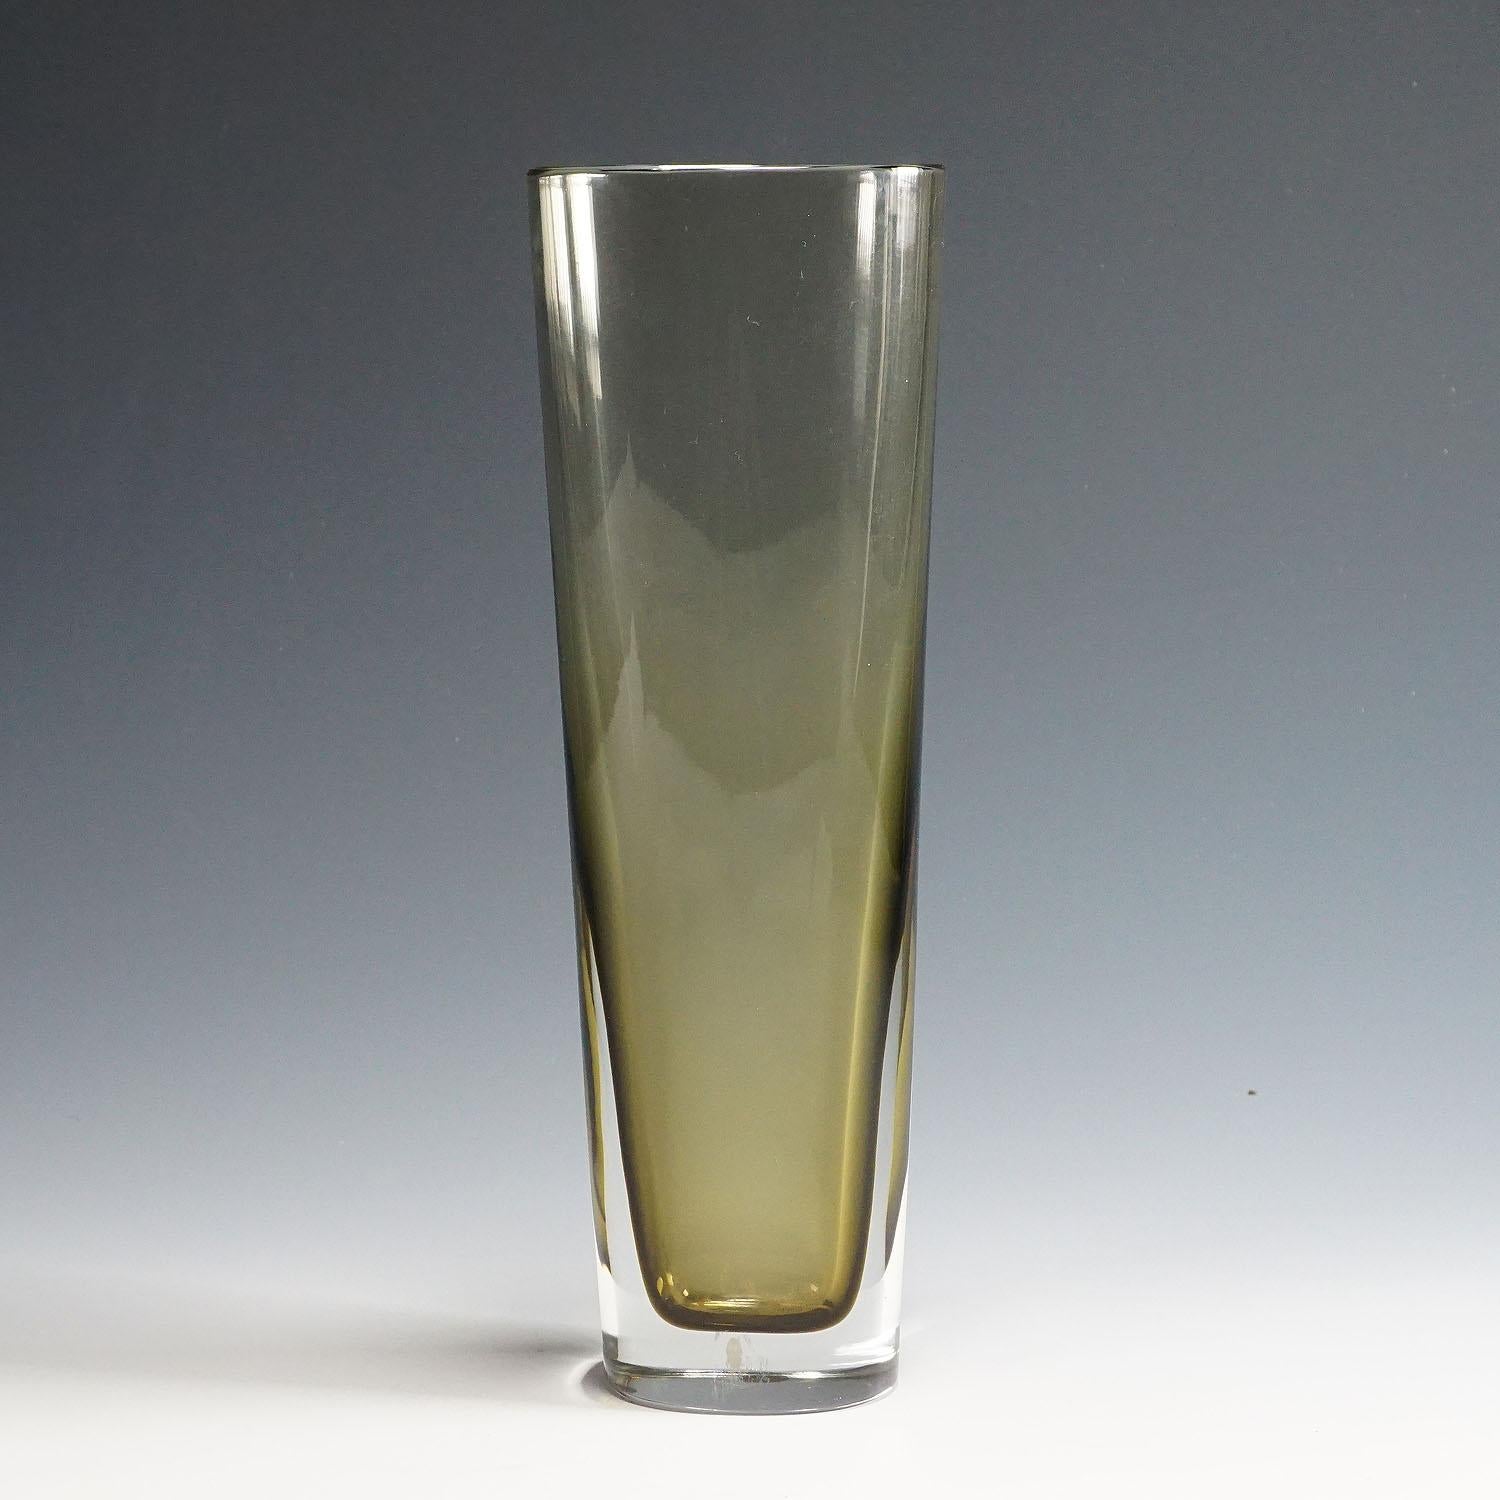 A large Venetian Sommerso glass vase manufactured by Seguso Vetri d'Arte and designed by Flavio Poli in the 1960s. Clear and grey Sommerso glass, polished rim. Rests of the 1960s Seguso label on the body. Signed 